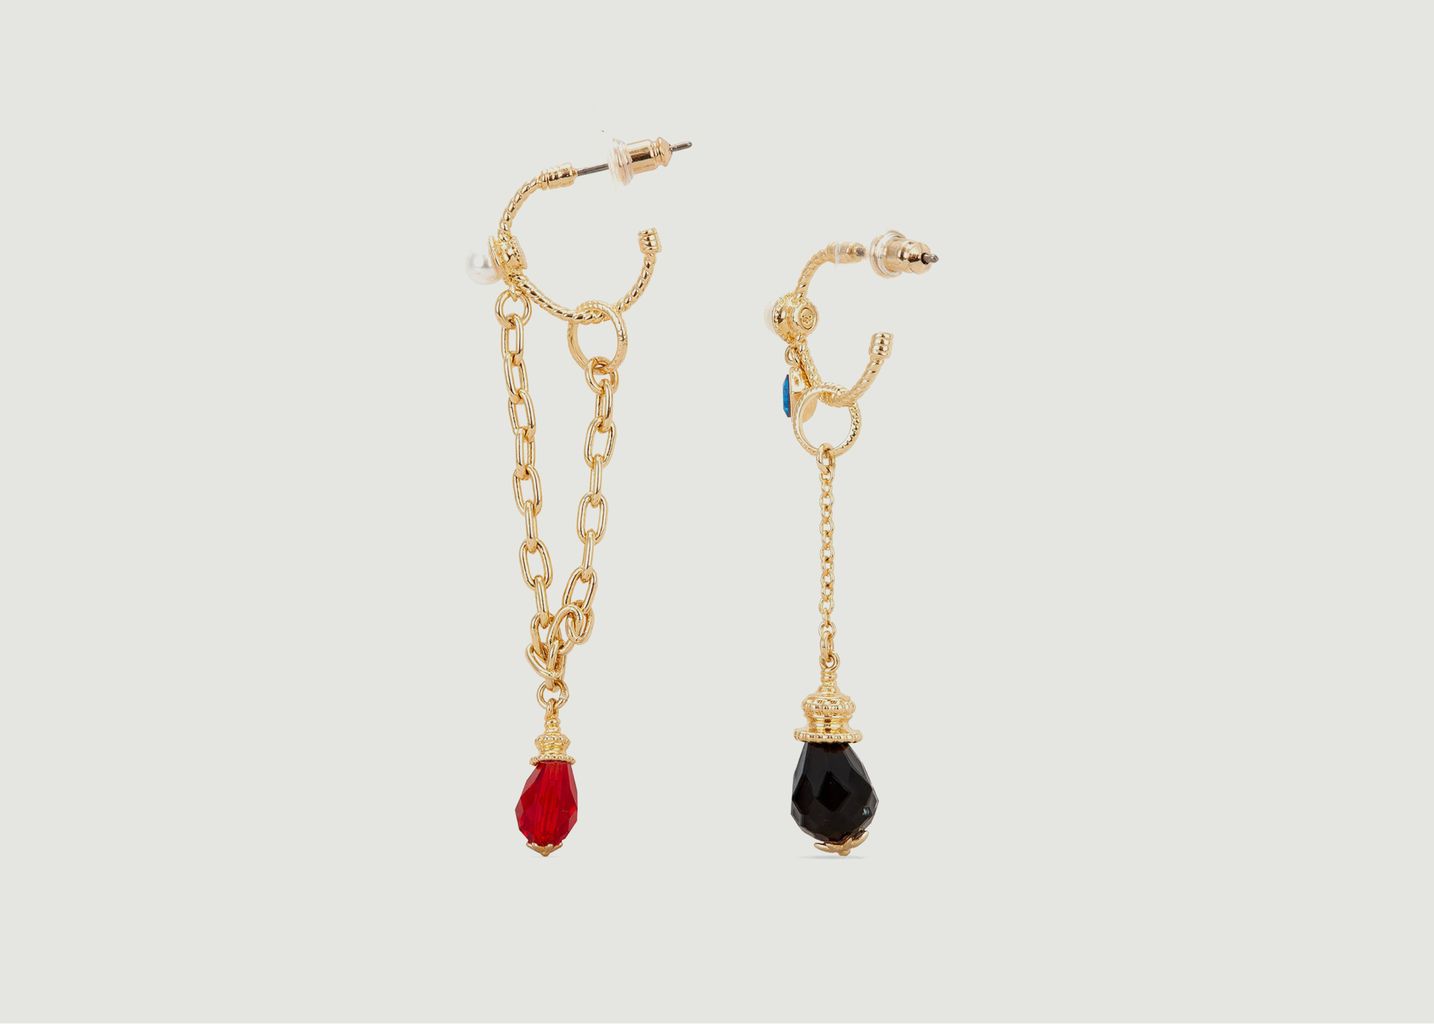 Asymmetrical beaded earrings with gold chain